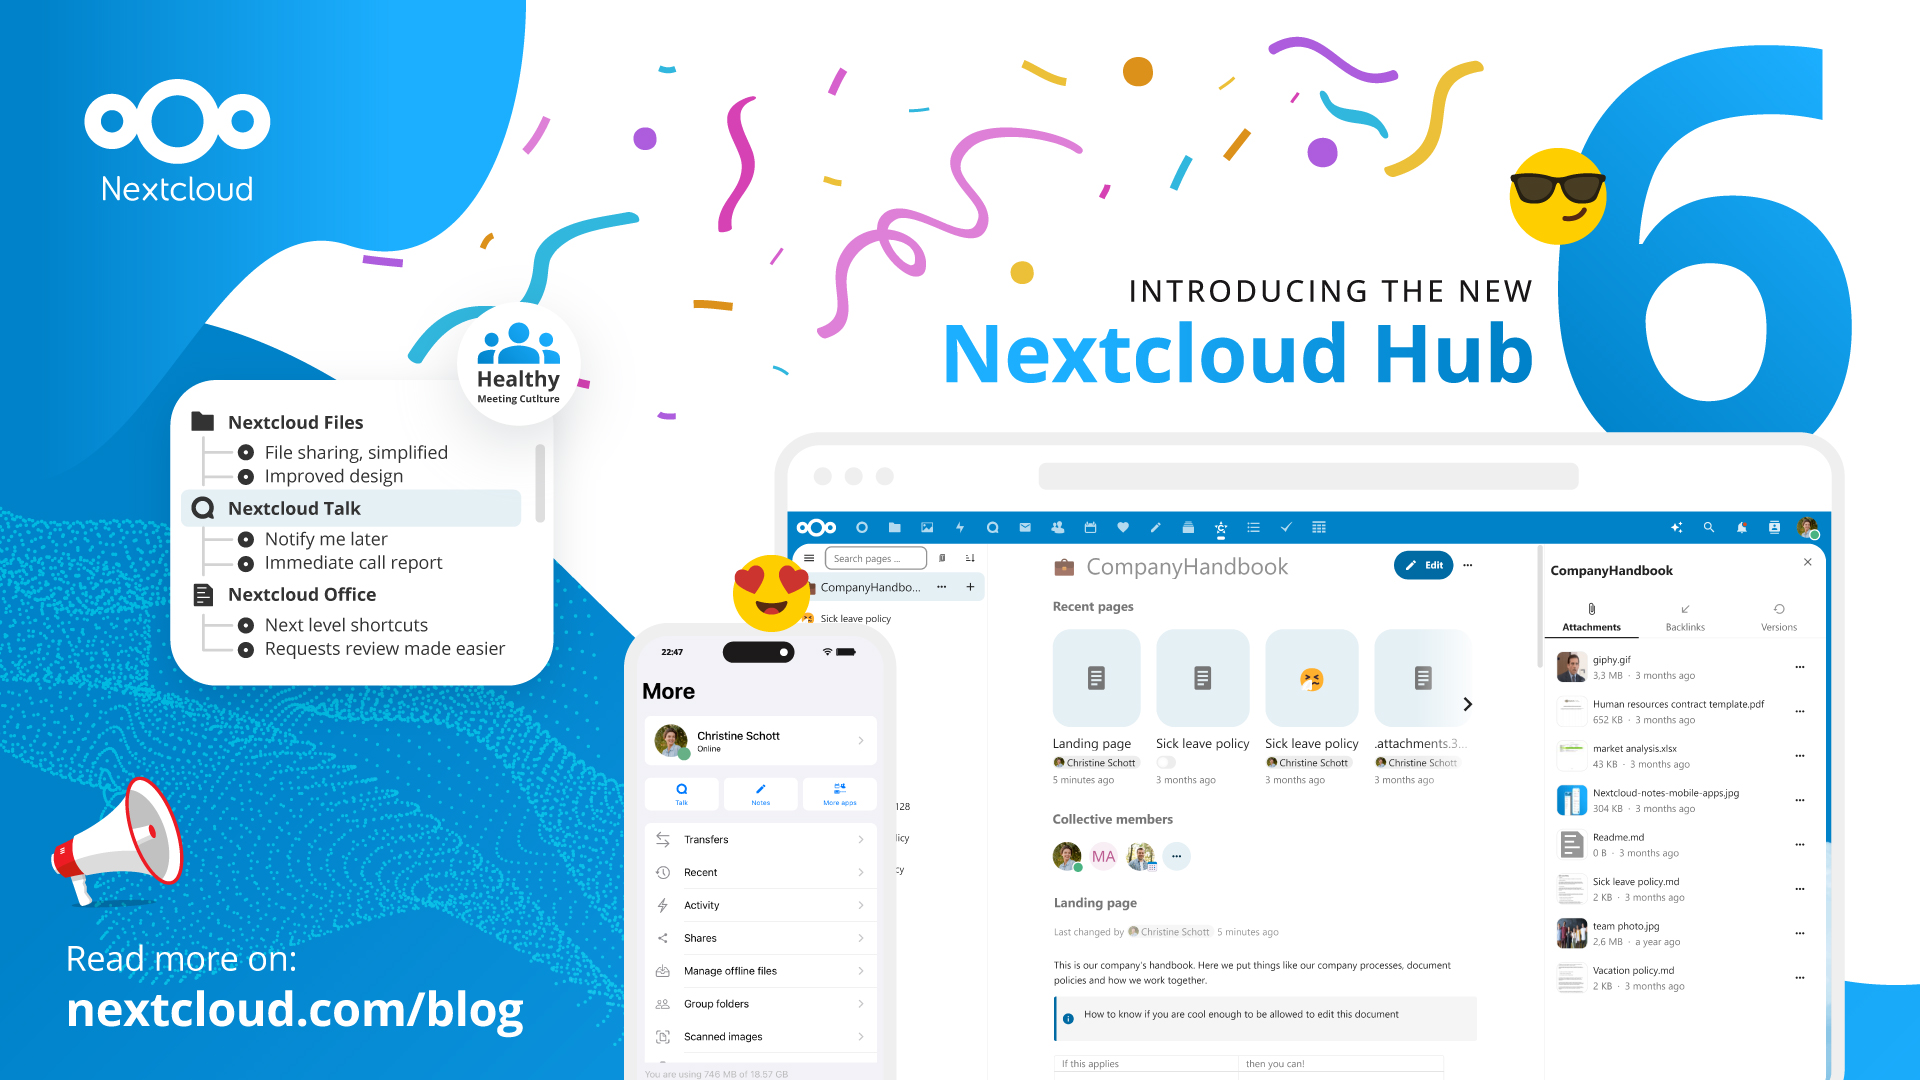 Our latest release supports a healthy meeting culture, introduces the Nextcloud Assistant and emphasizes user-centric design, transparency and user co